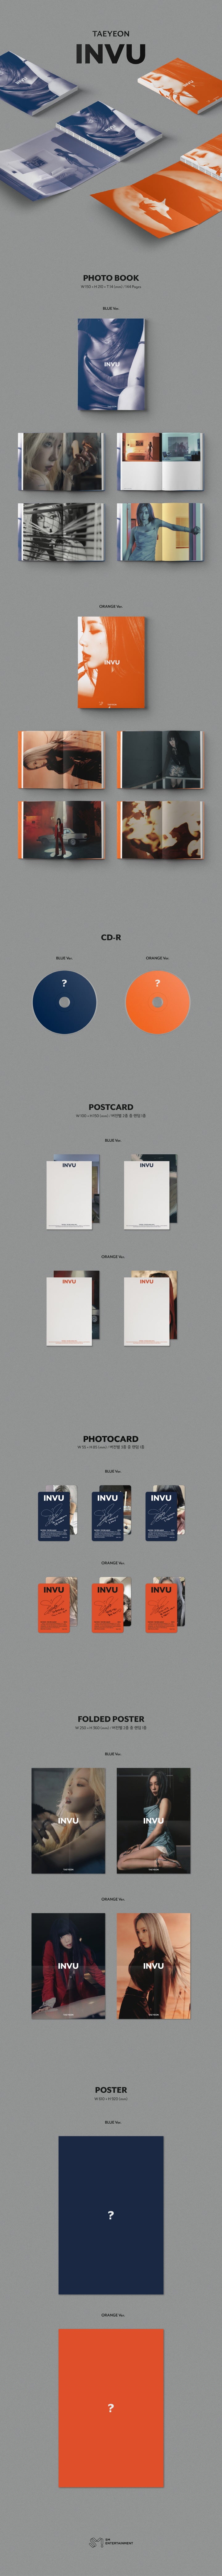 1 CD
1 Photo Book (144 pages)
1 Postcard (random out of 2 types)
1 Photo Card (random out of 3 types)
1 Folded Poster (ran...